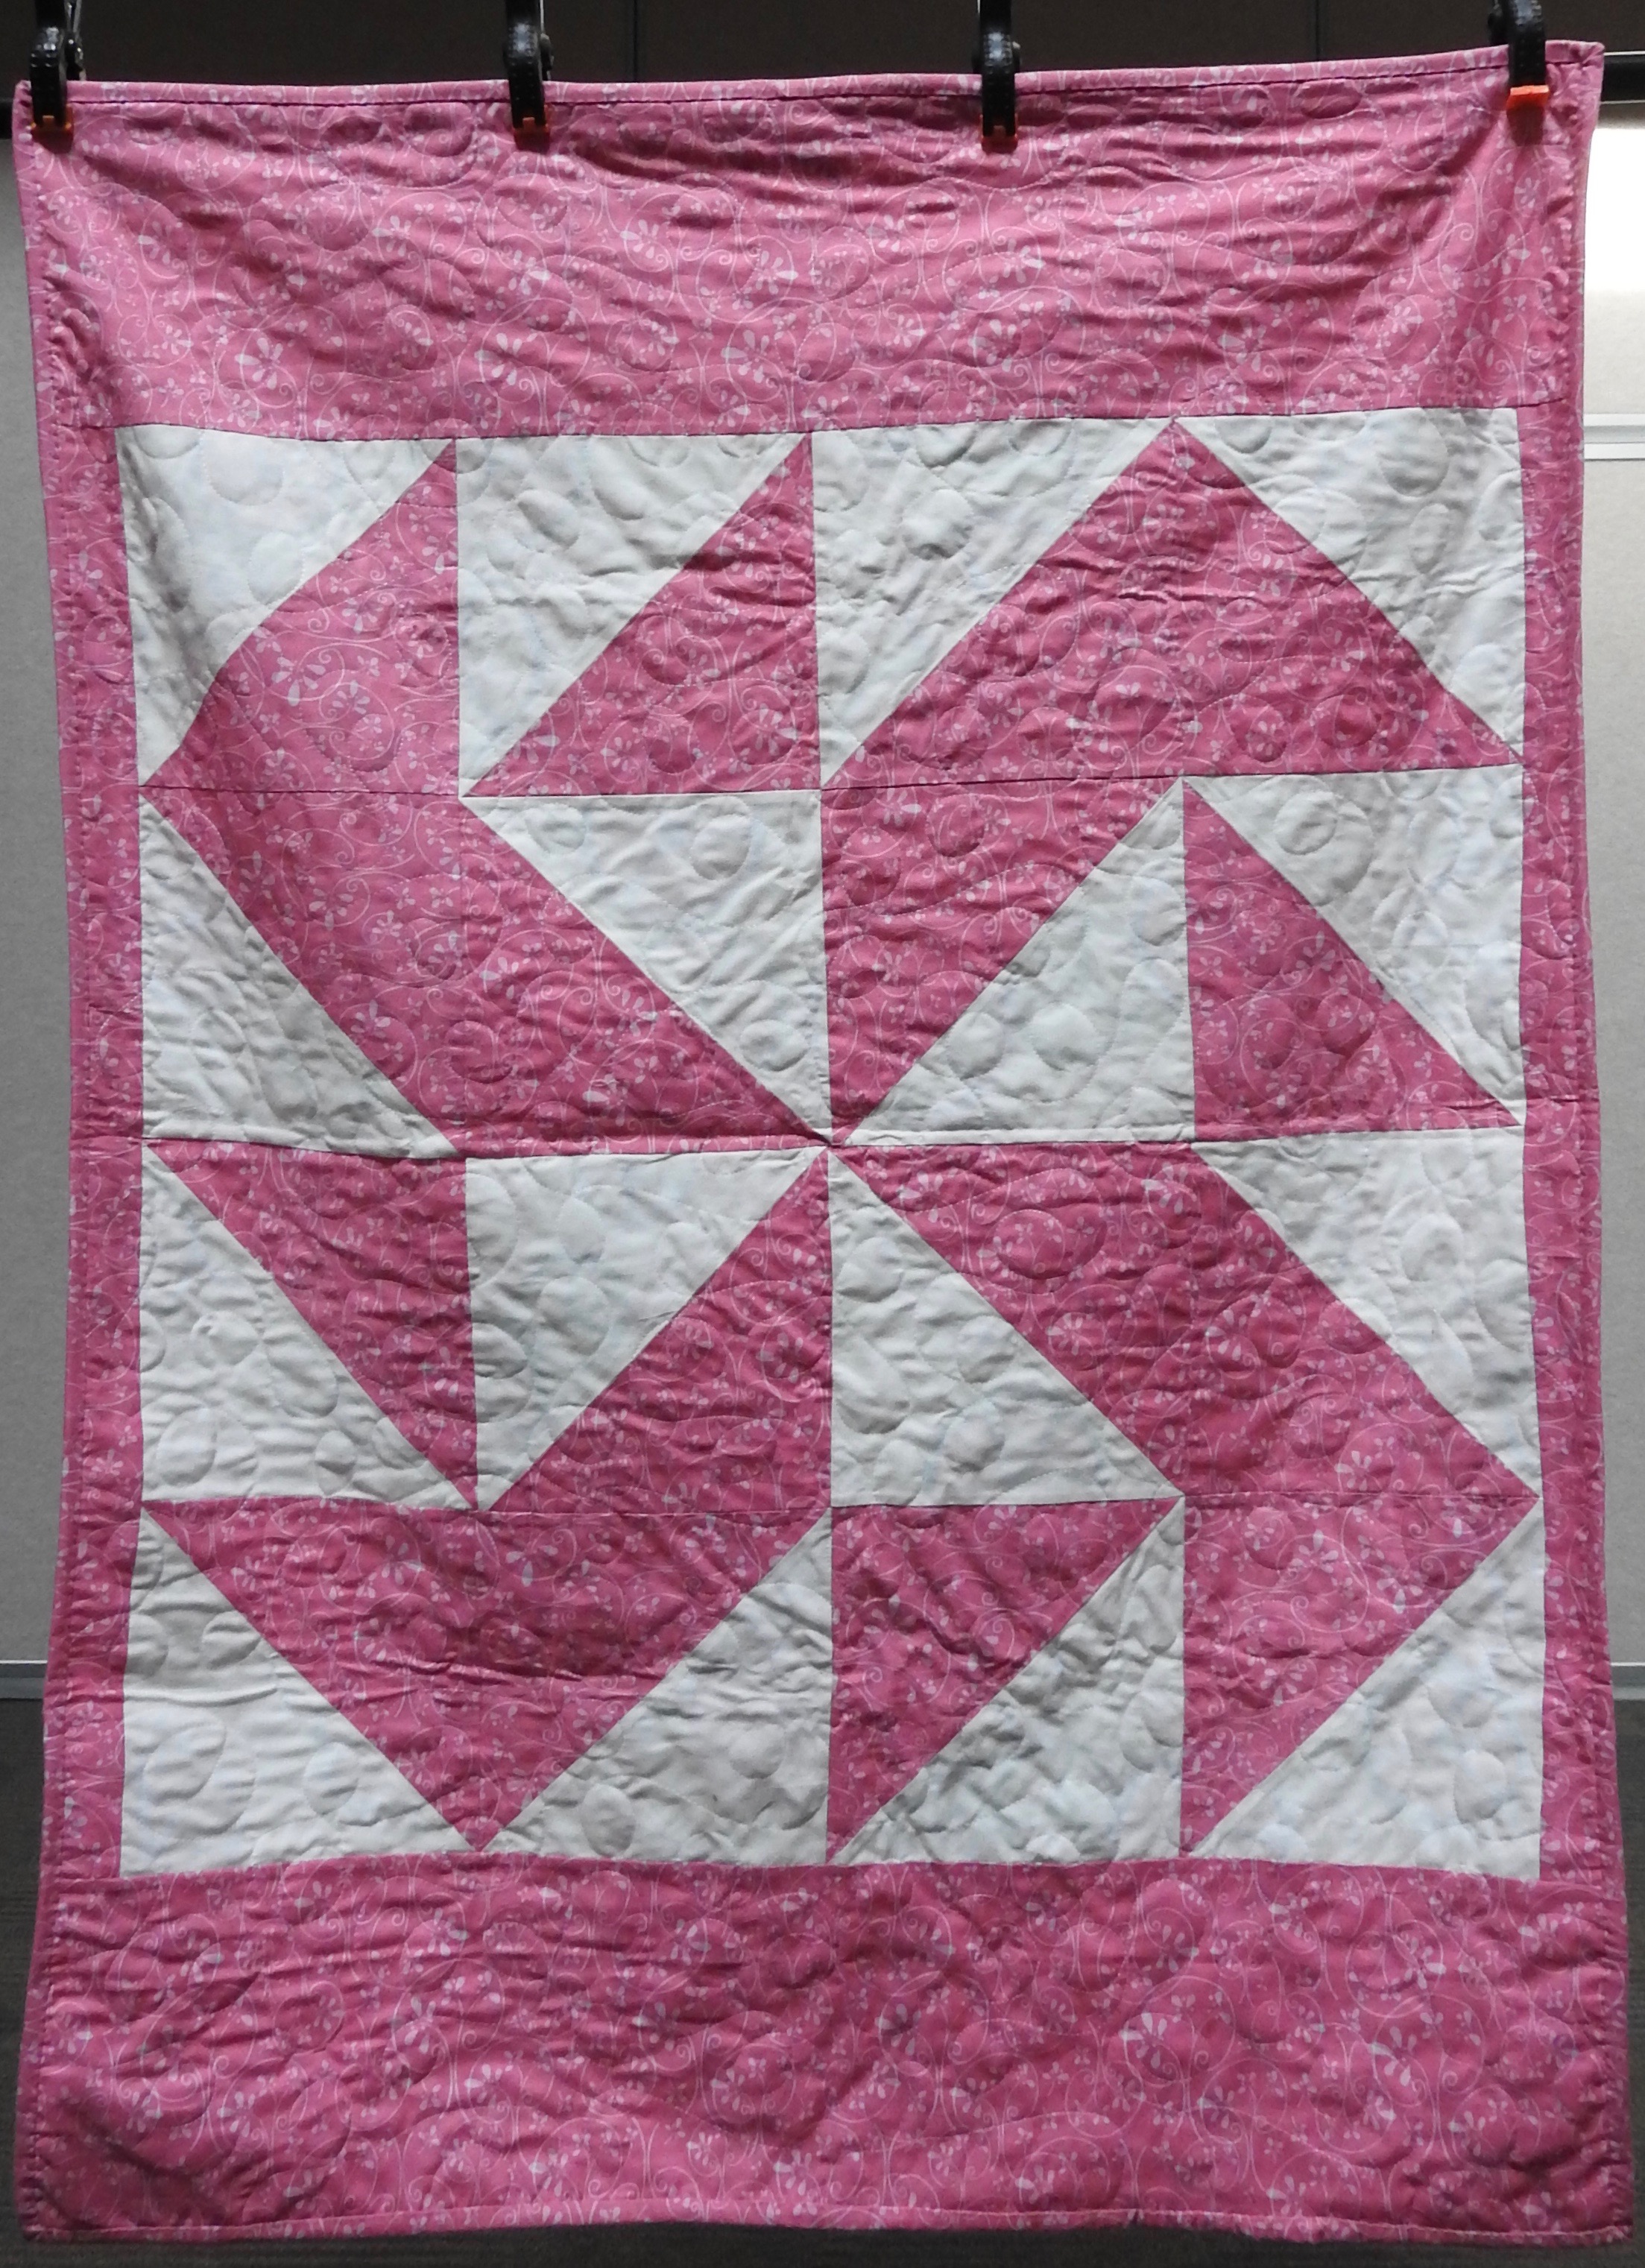  Twirling ‘Round Baby Quilt, Pieced, Plush Back, Edge to Edge Machine Quilted, donated anonymously, 38 x 51”